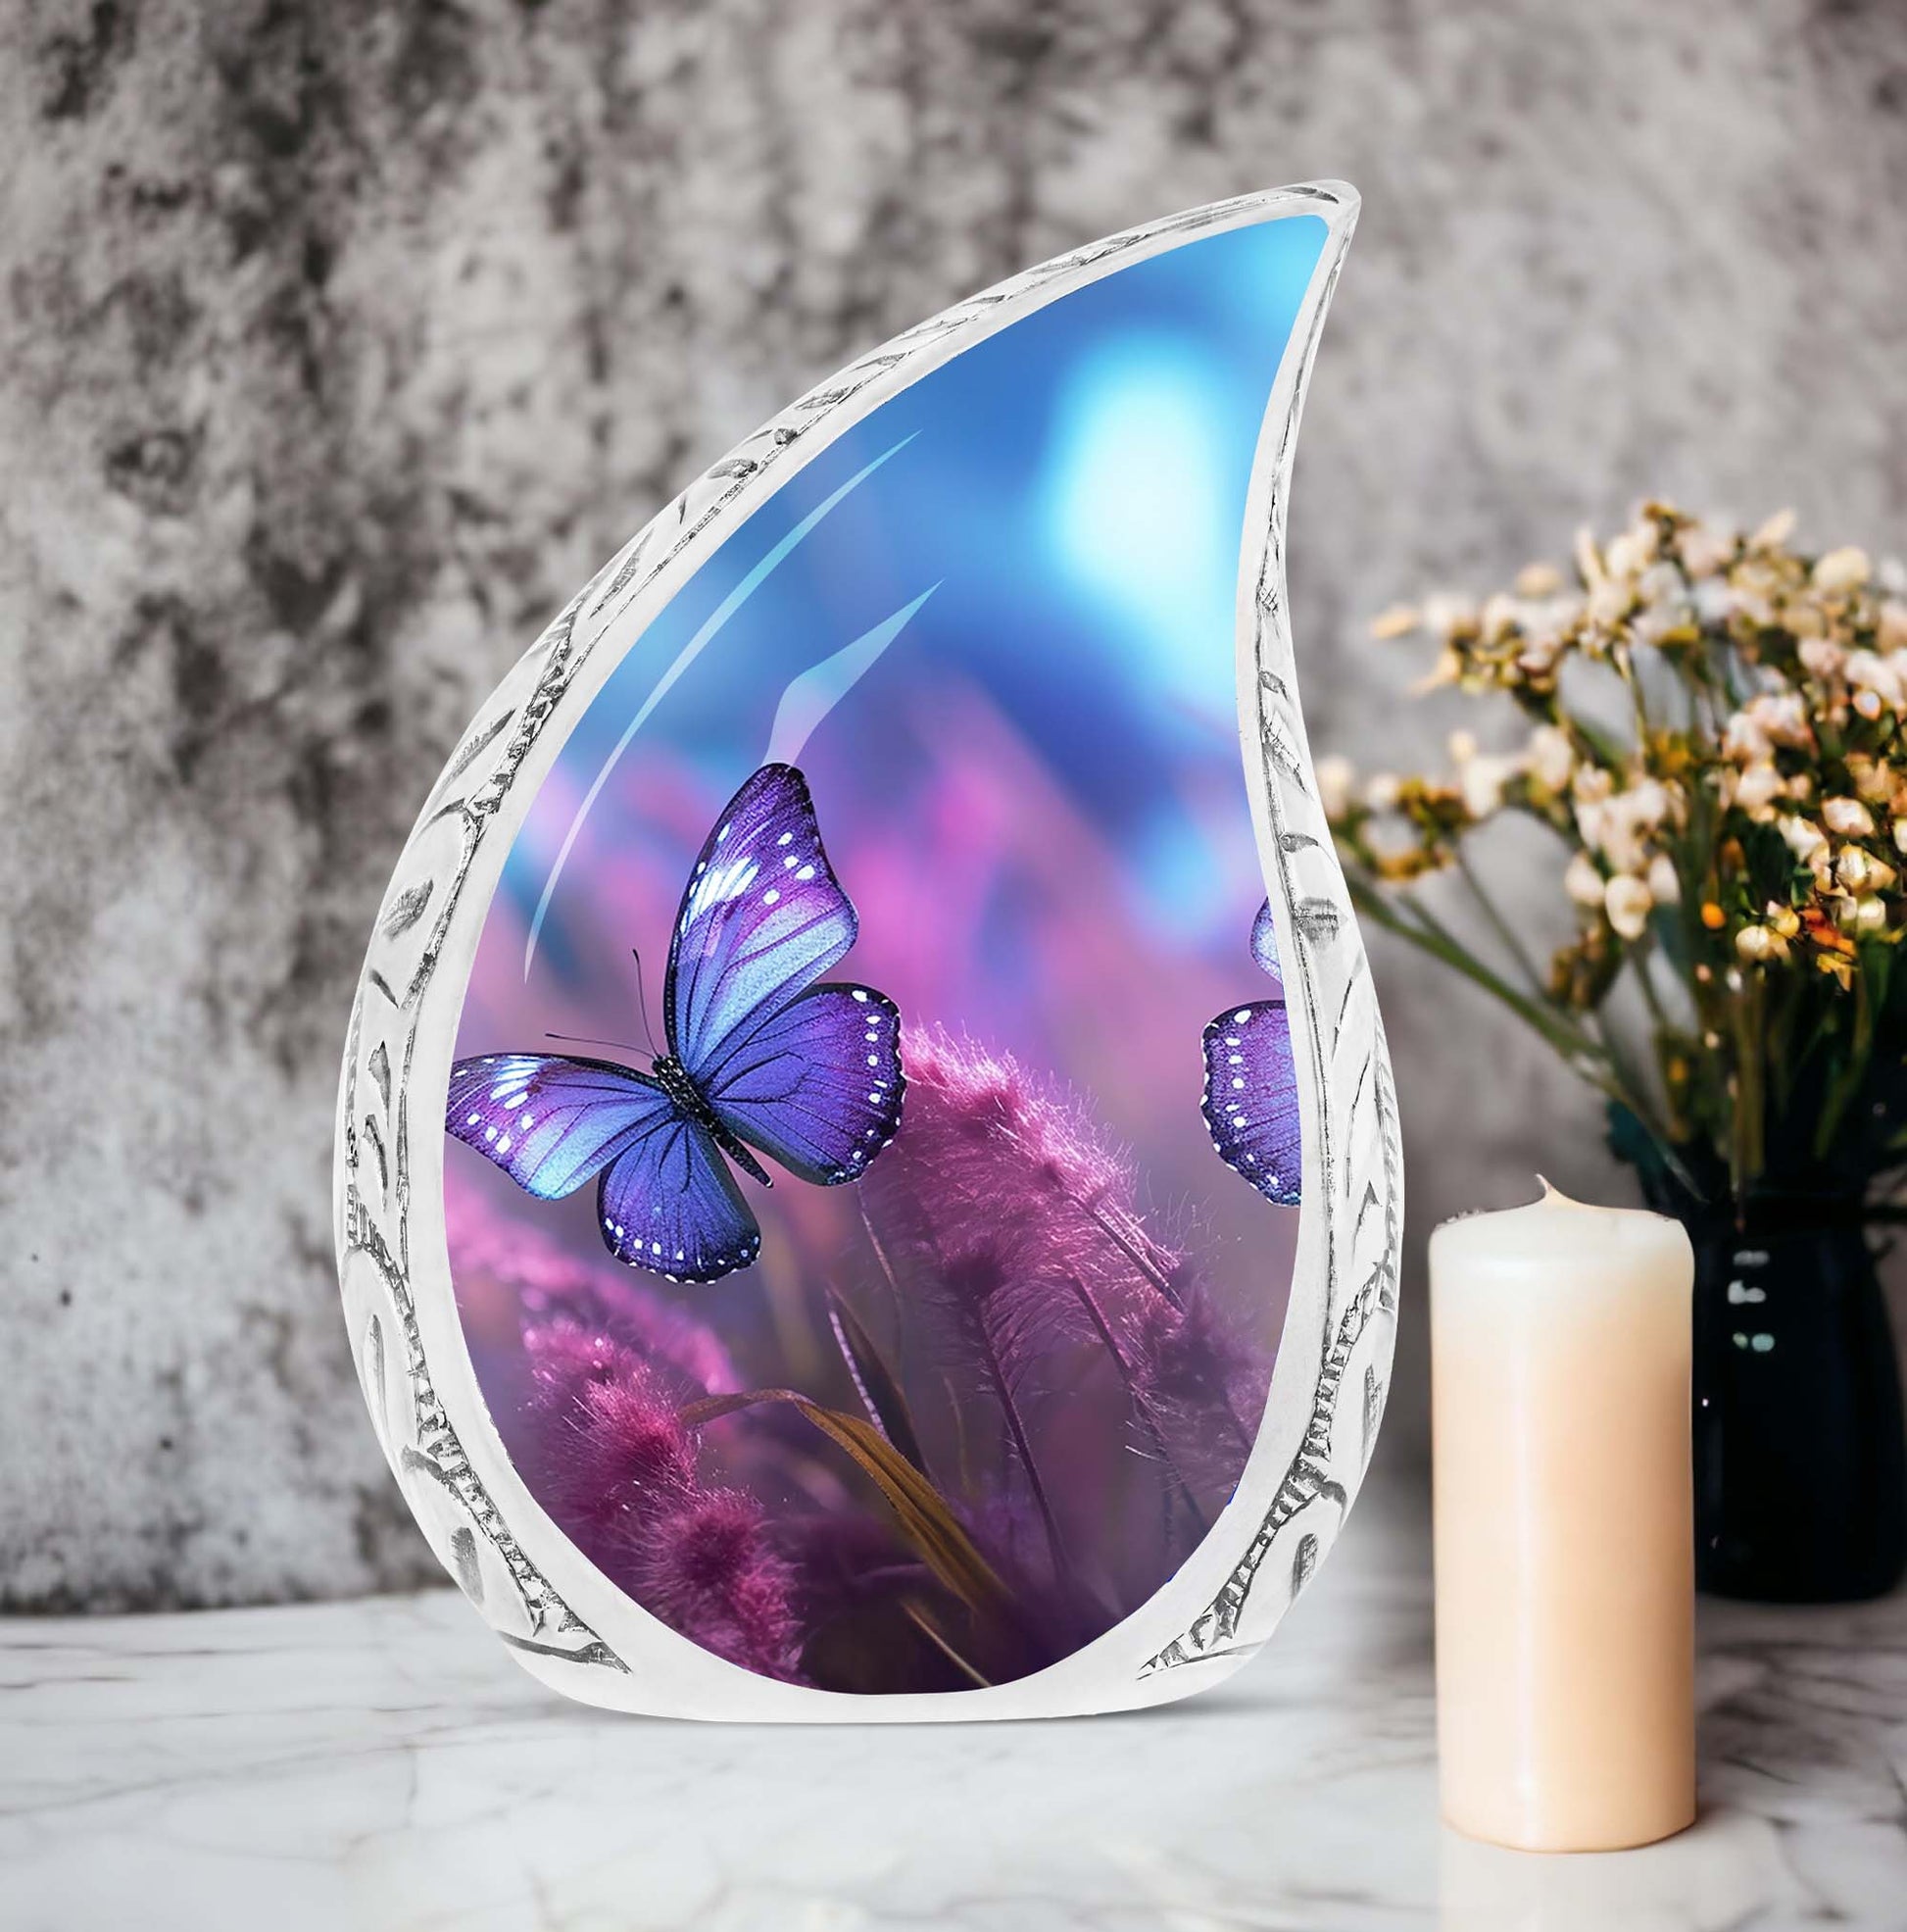 Sturdy adult cremation urn in purple featuring an artistic butterfly design for safekeeping of human ashes